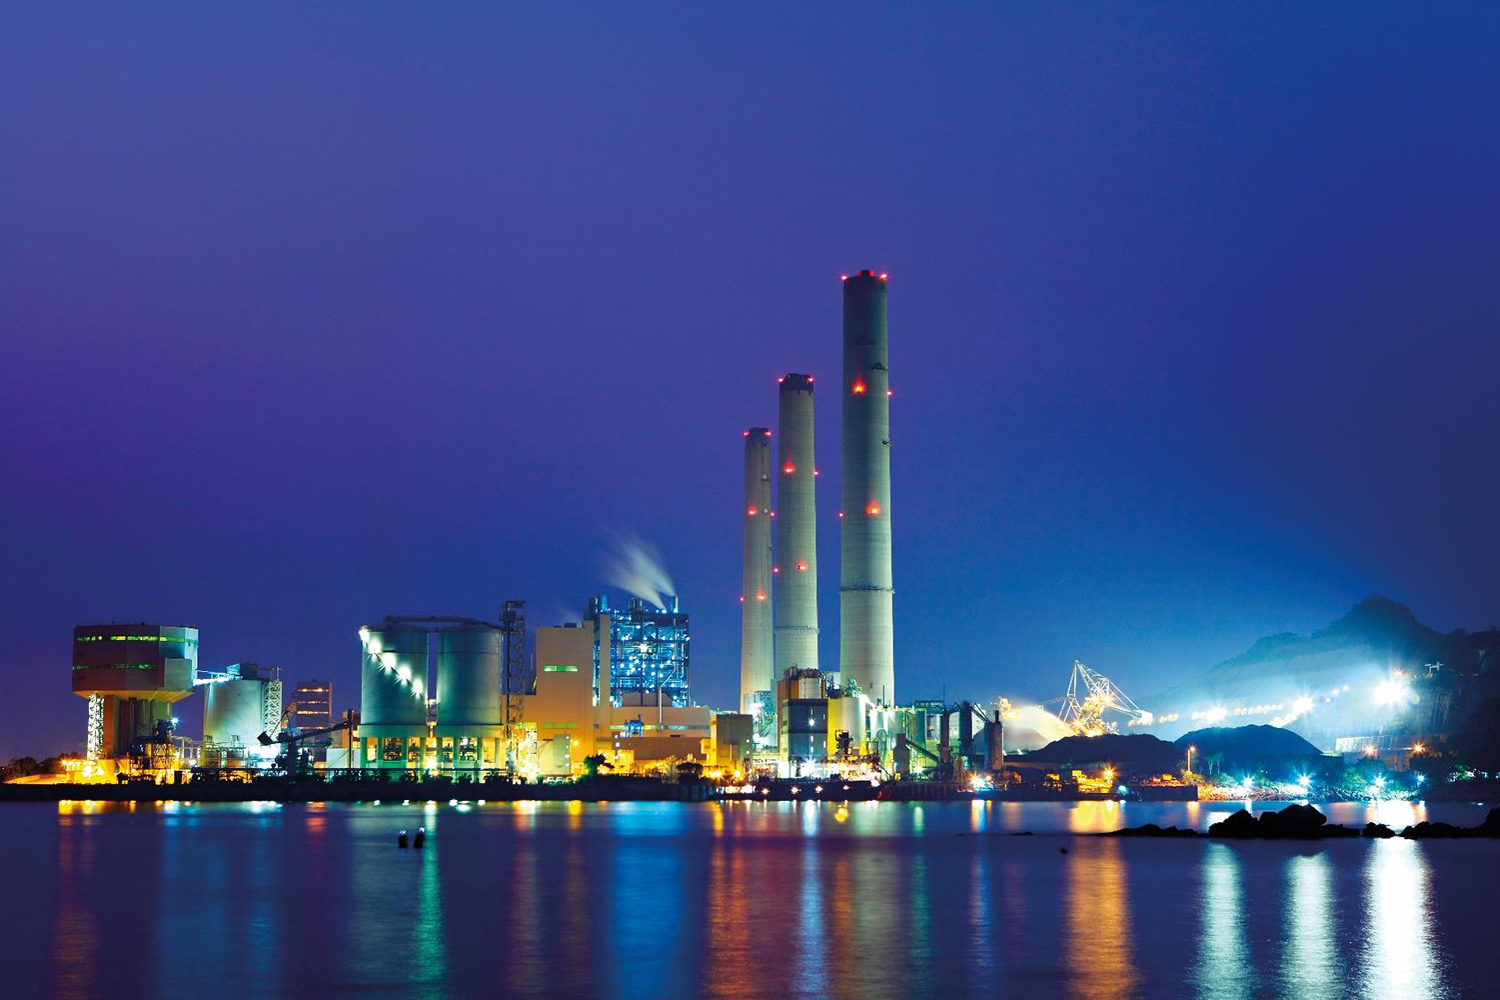 When a major thermal power Plant in Rajasthan, India, faced multiple issues with an aging boiler infeed pump, the energy player overcame supply and technical challenges through their partnership with Sulzer.